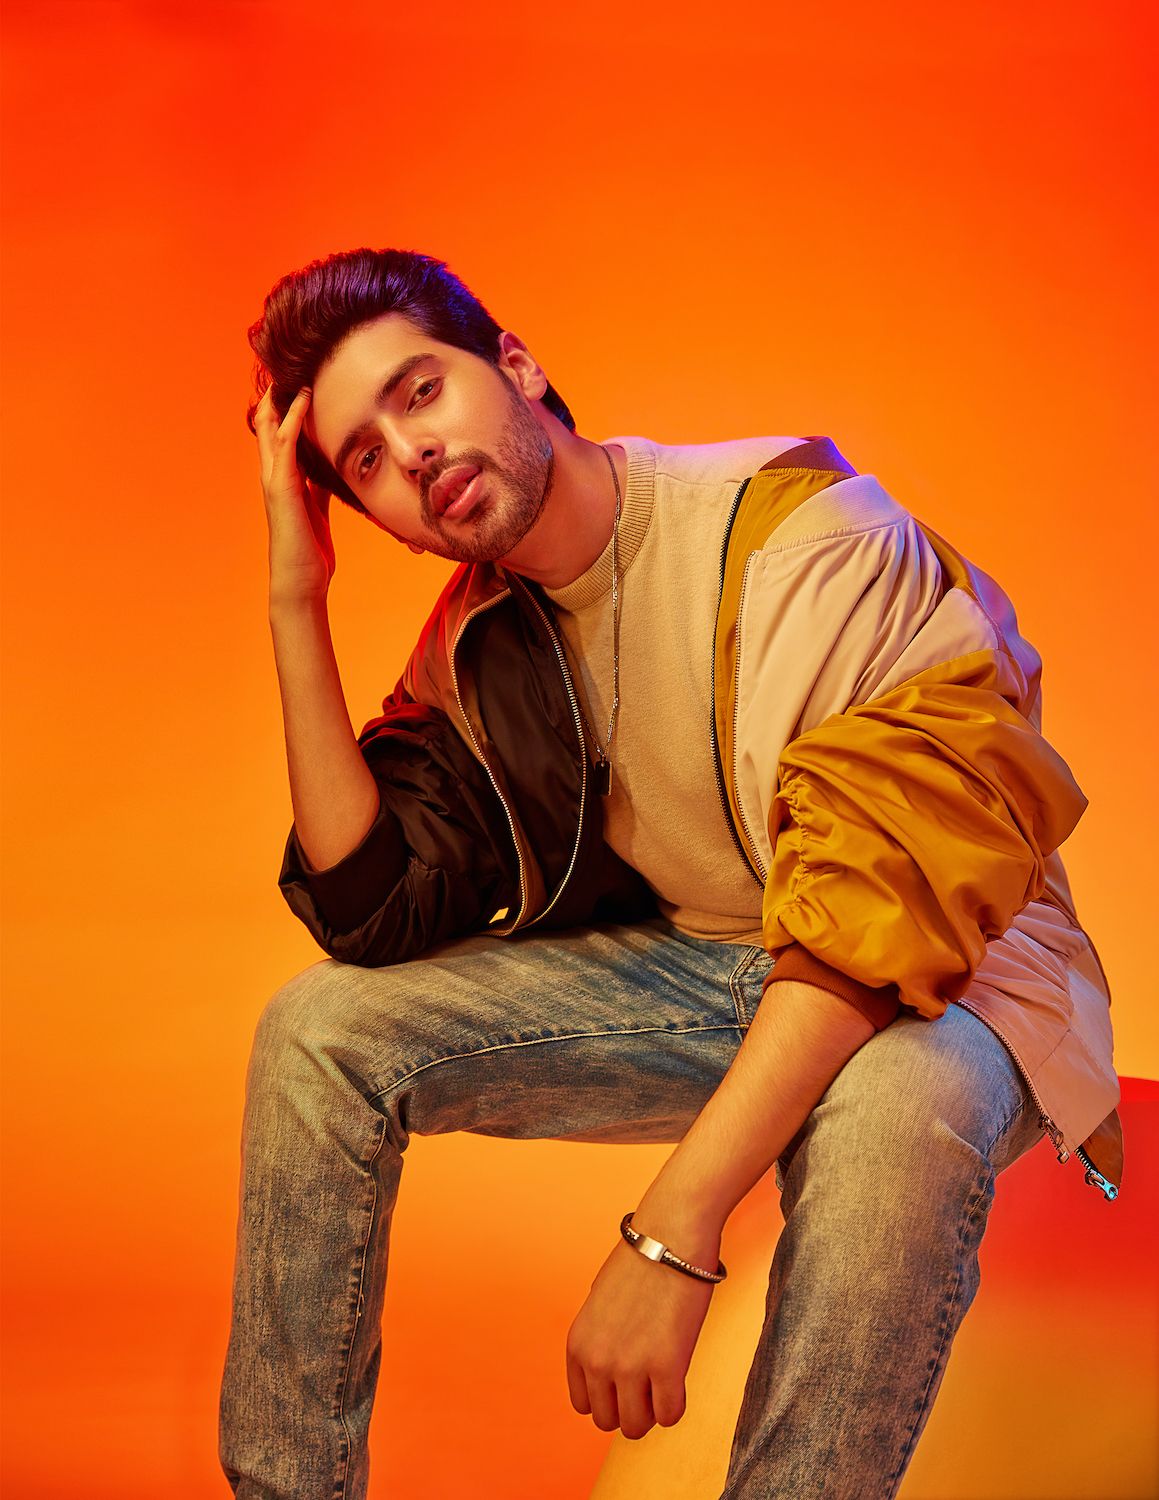 COVER STORY: Armaan Malik | The Making of a Pop